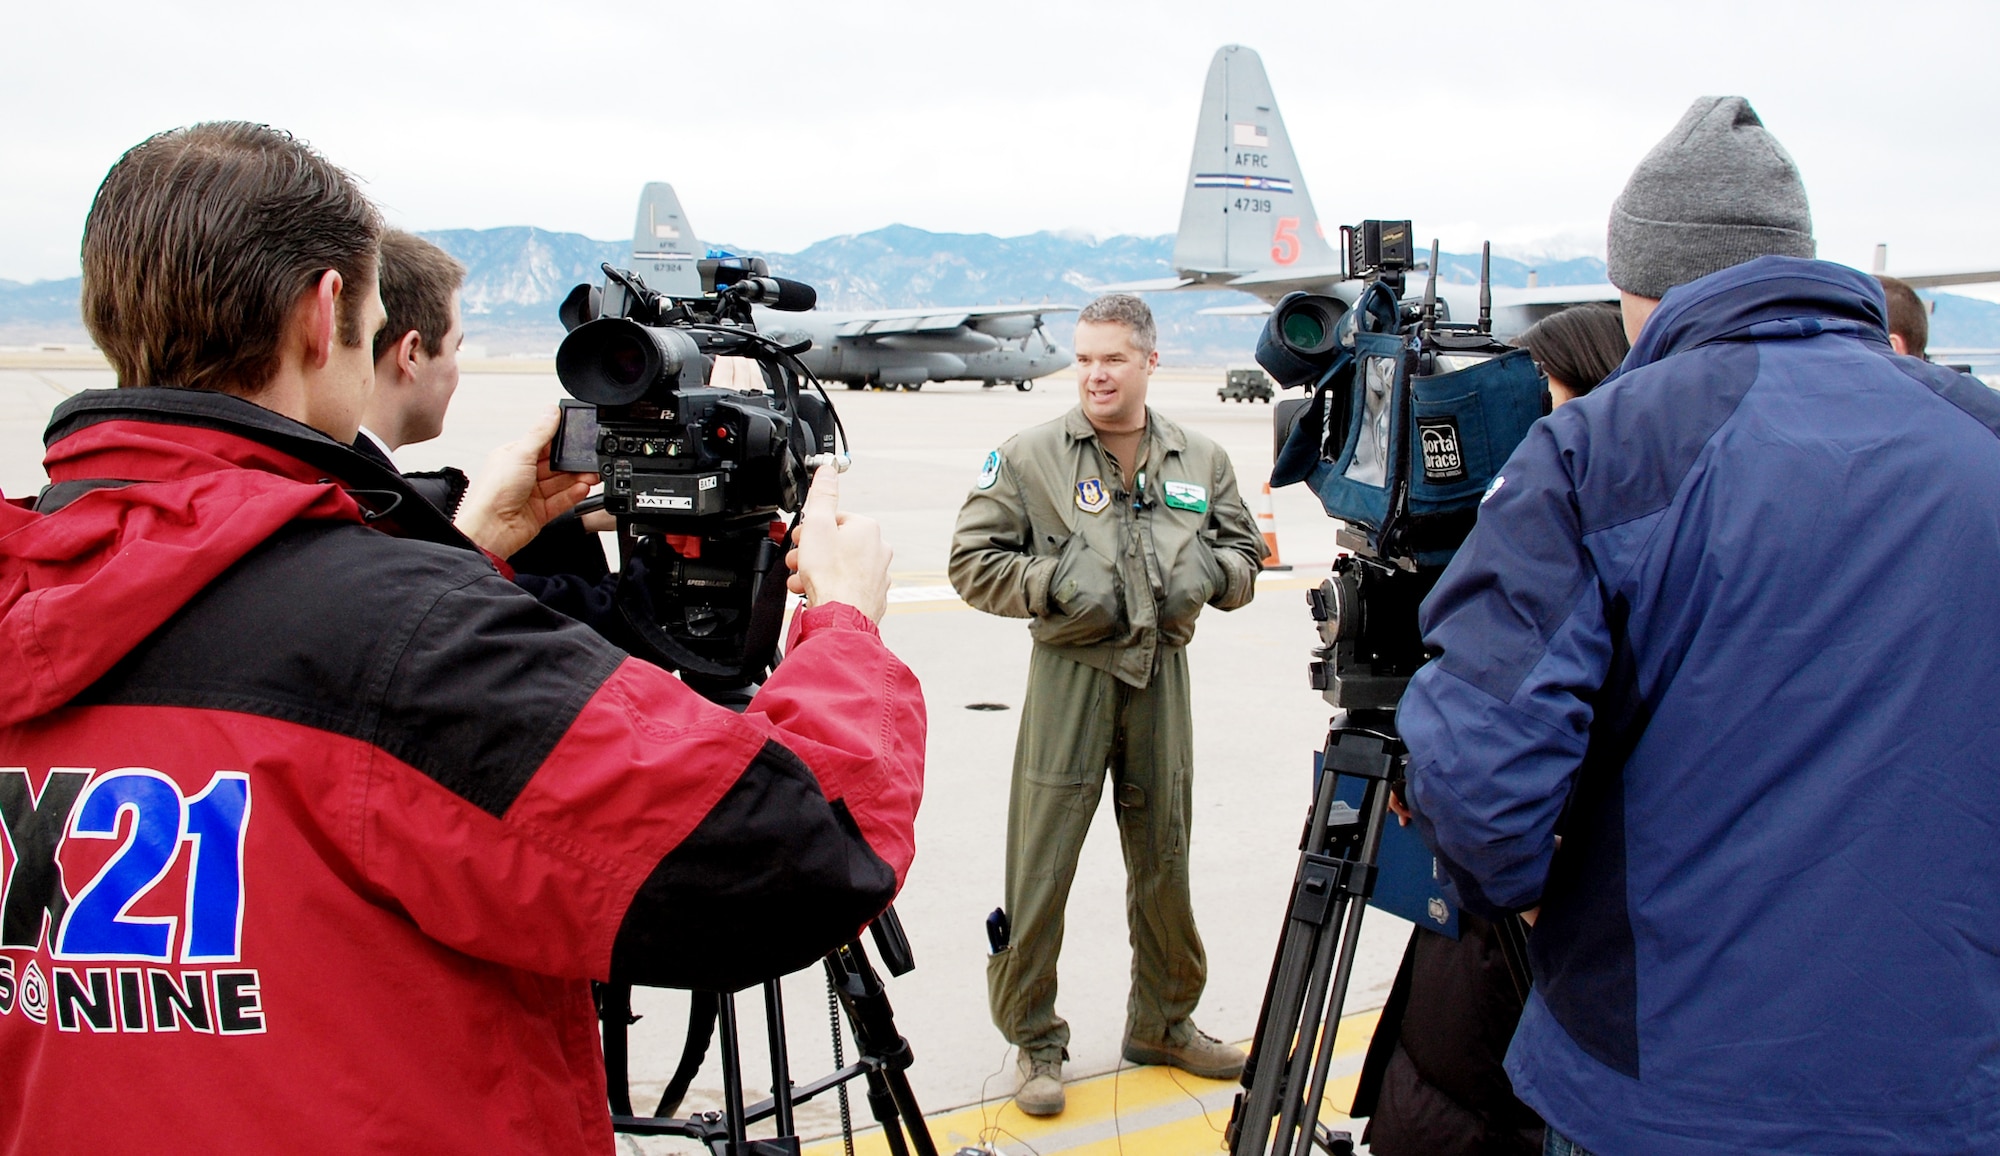 Maj. Brad James meets with Colorado Springs, Colo., media before departing in support of Operation Coronet Oak Jan. 22, 2010, from Peterson Air Force Base, Colo. Two C-130 Hercules and approximately 50 Air Force reservists from the 302nd Airlift Wing left Colorado to fly missions out of Puerto Rico in support of Haitian relief efforts. Major James is a 731st Airlift Squadron pilot. (U.S. Air Force photo/Tech. Sgt. Daniel Butterfield)